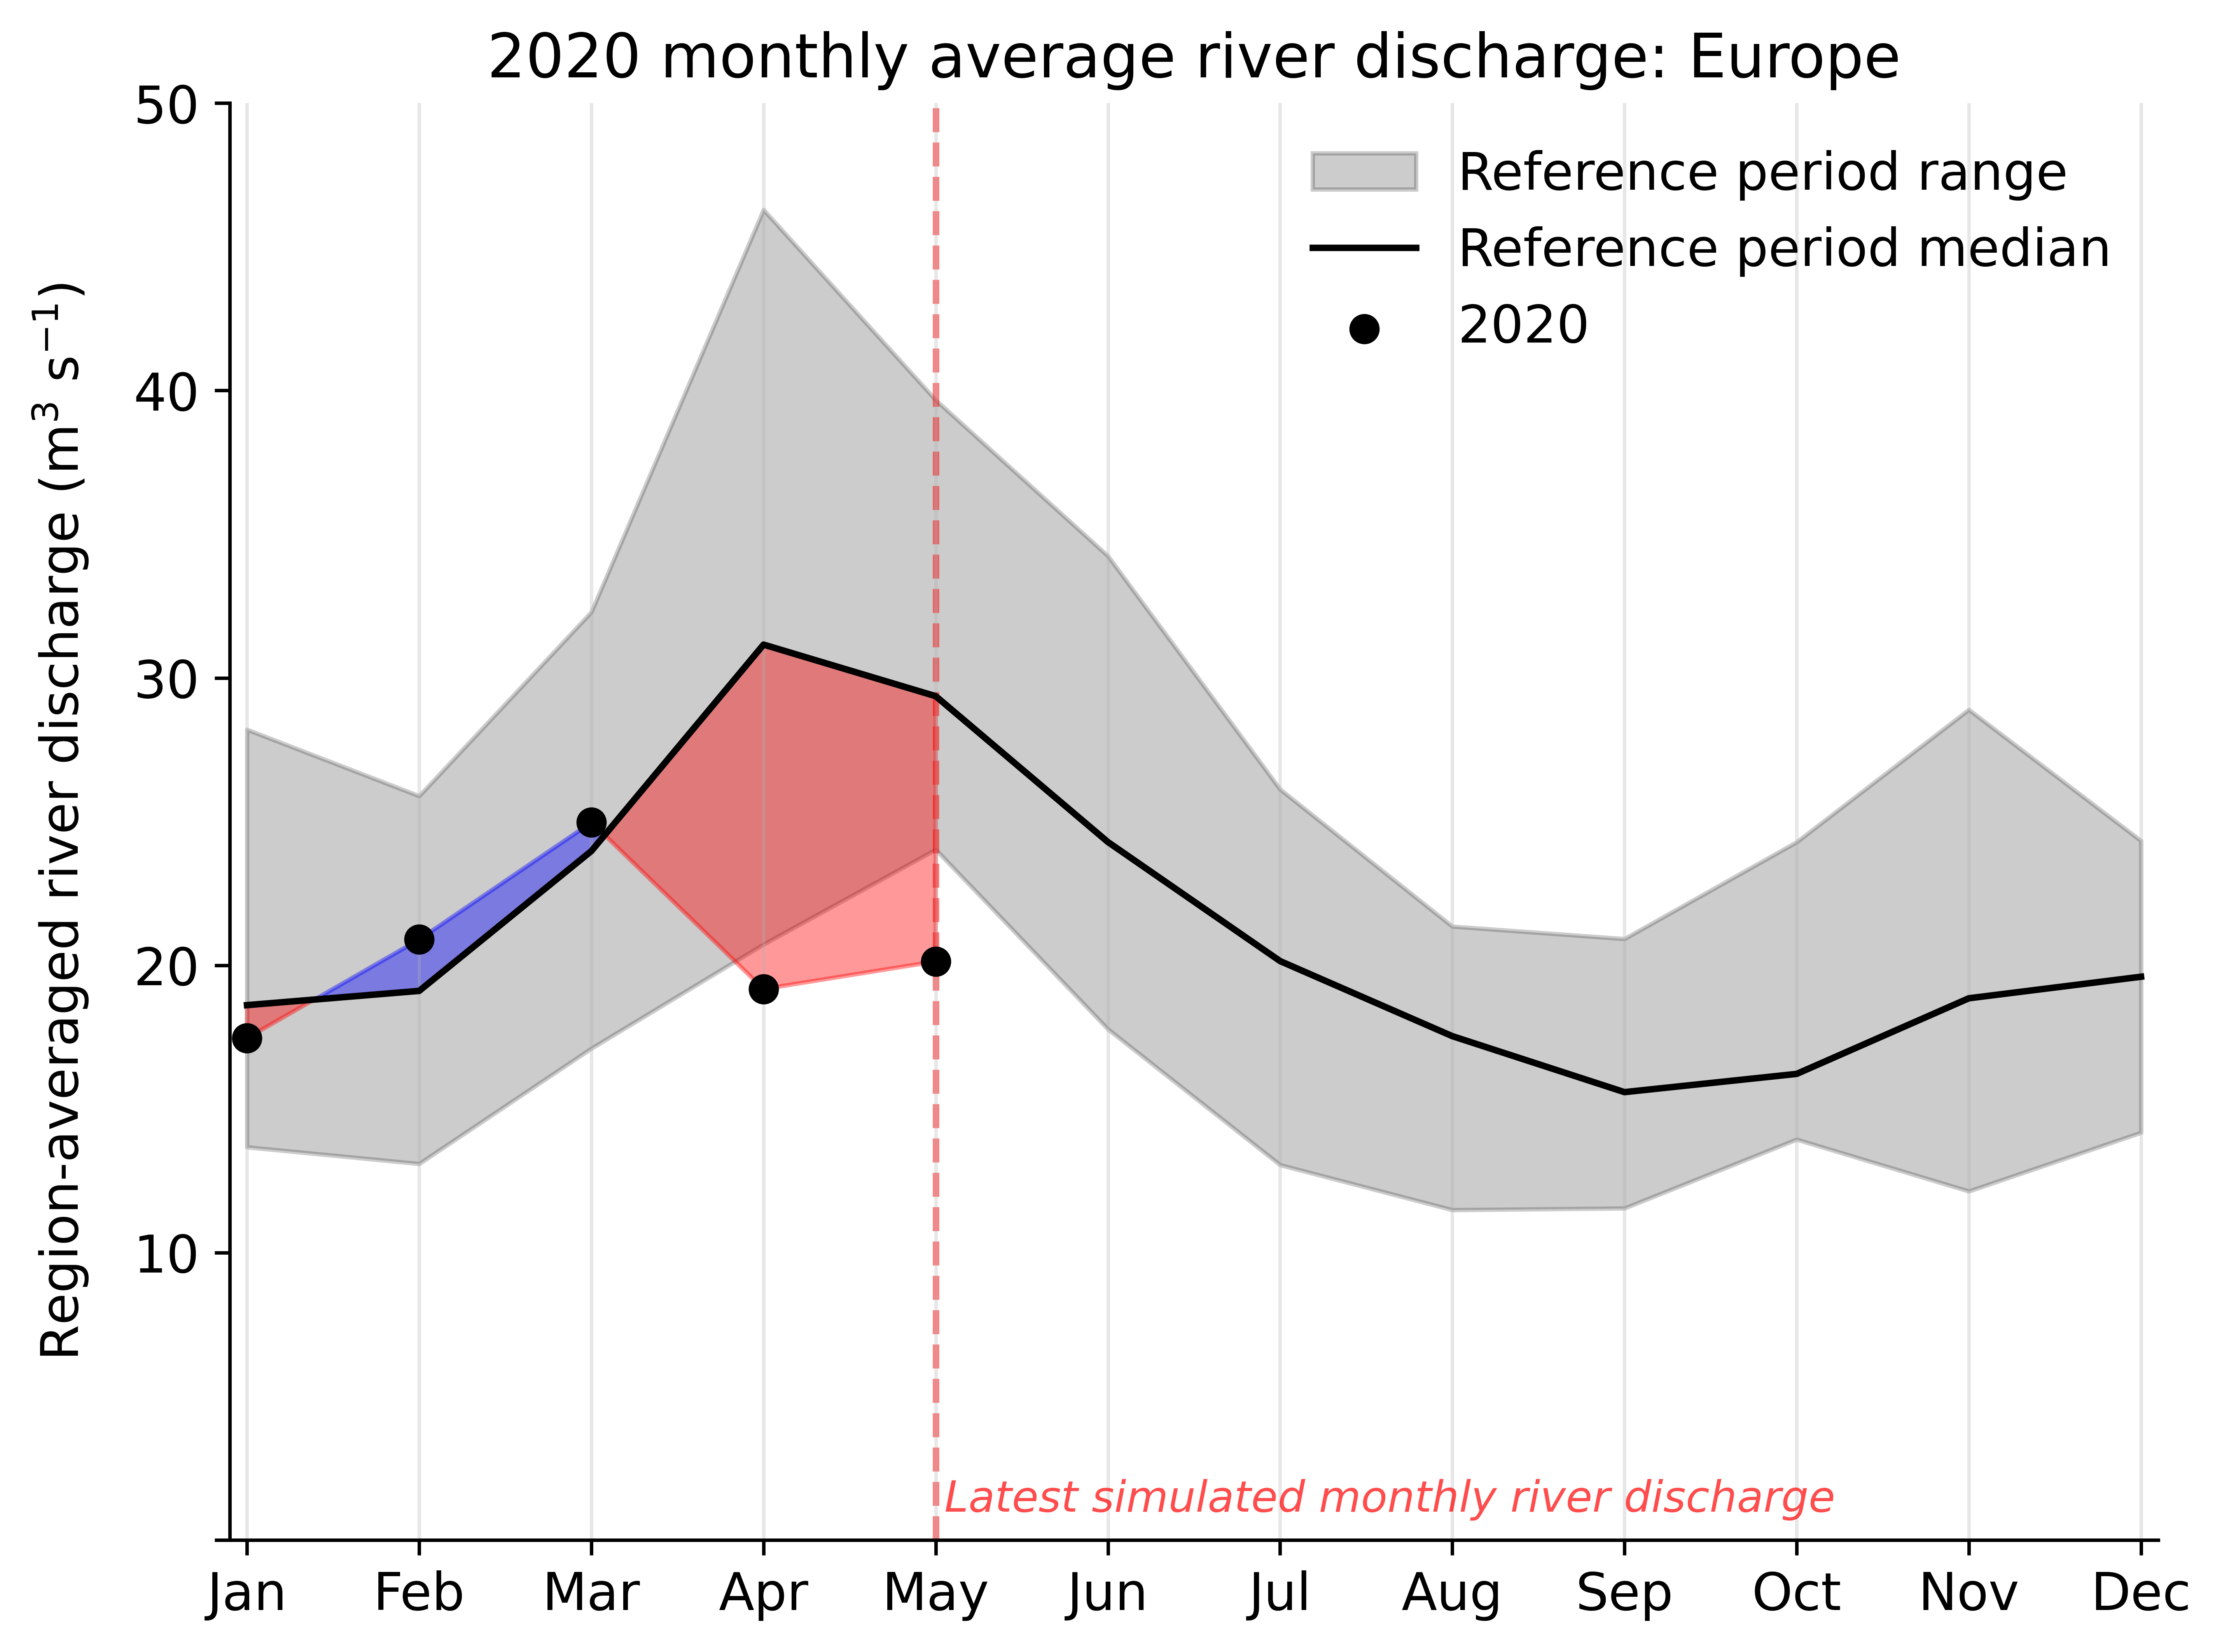 2020 monthly average river discharge for Europe